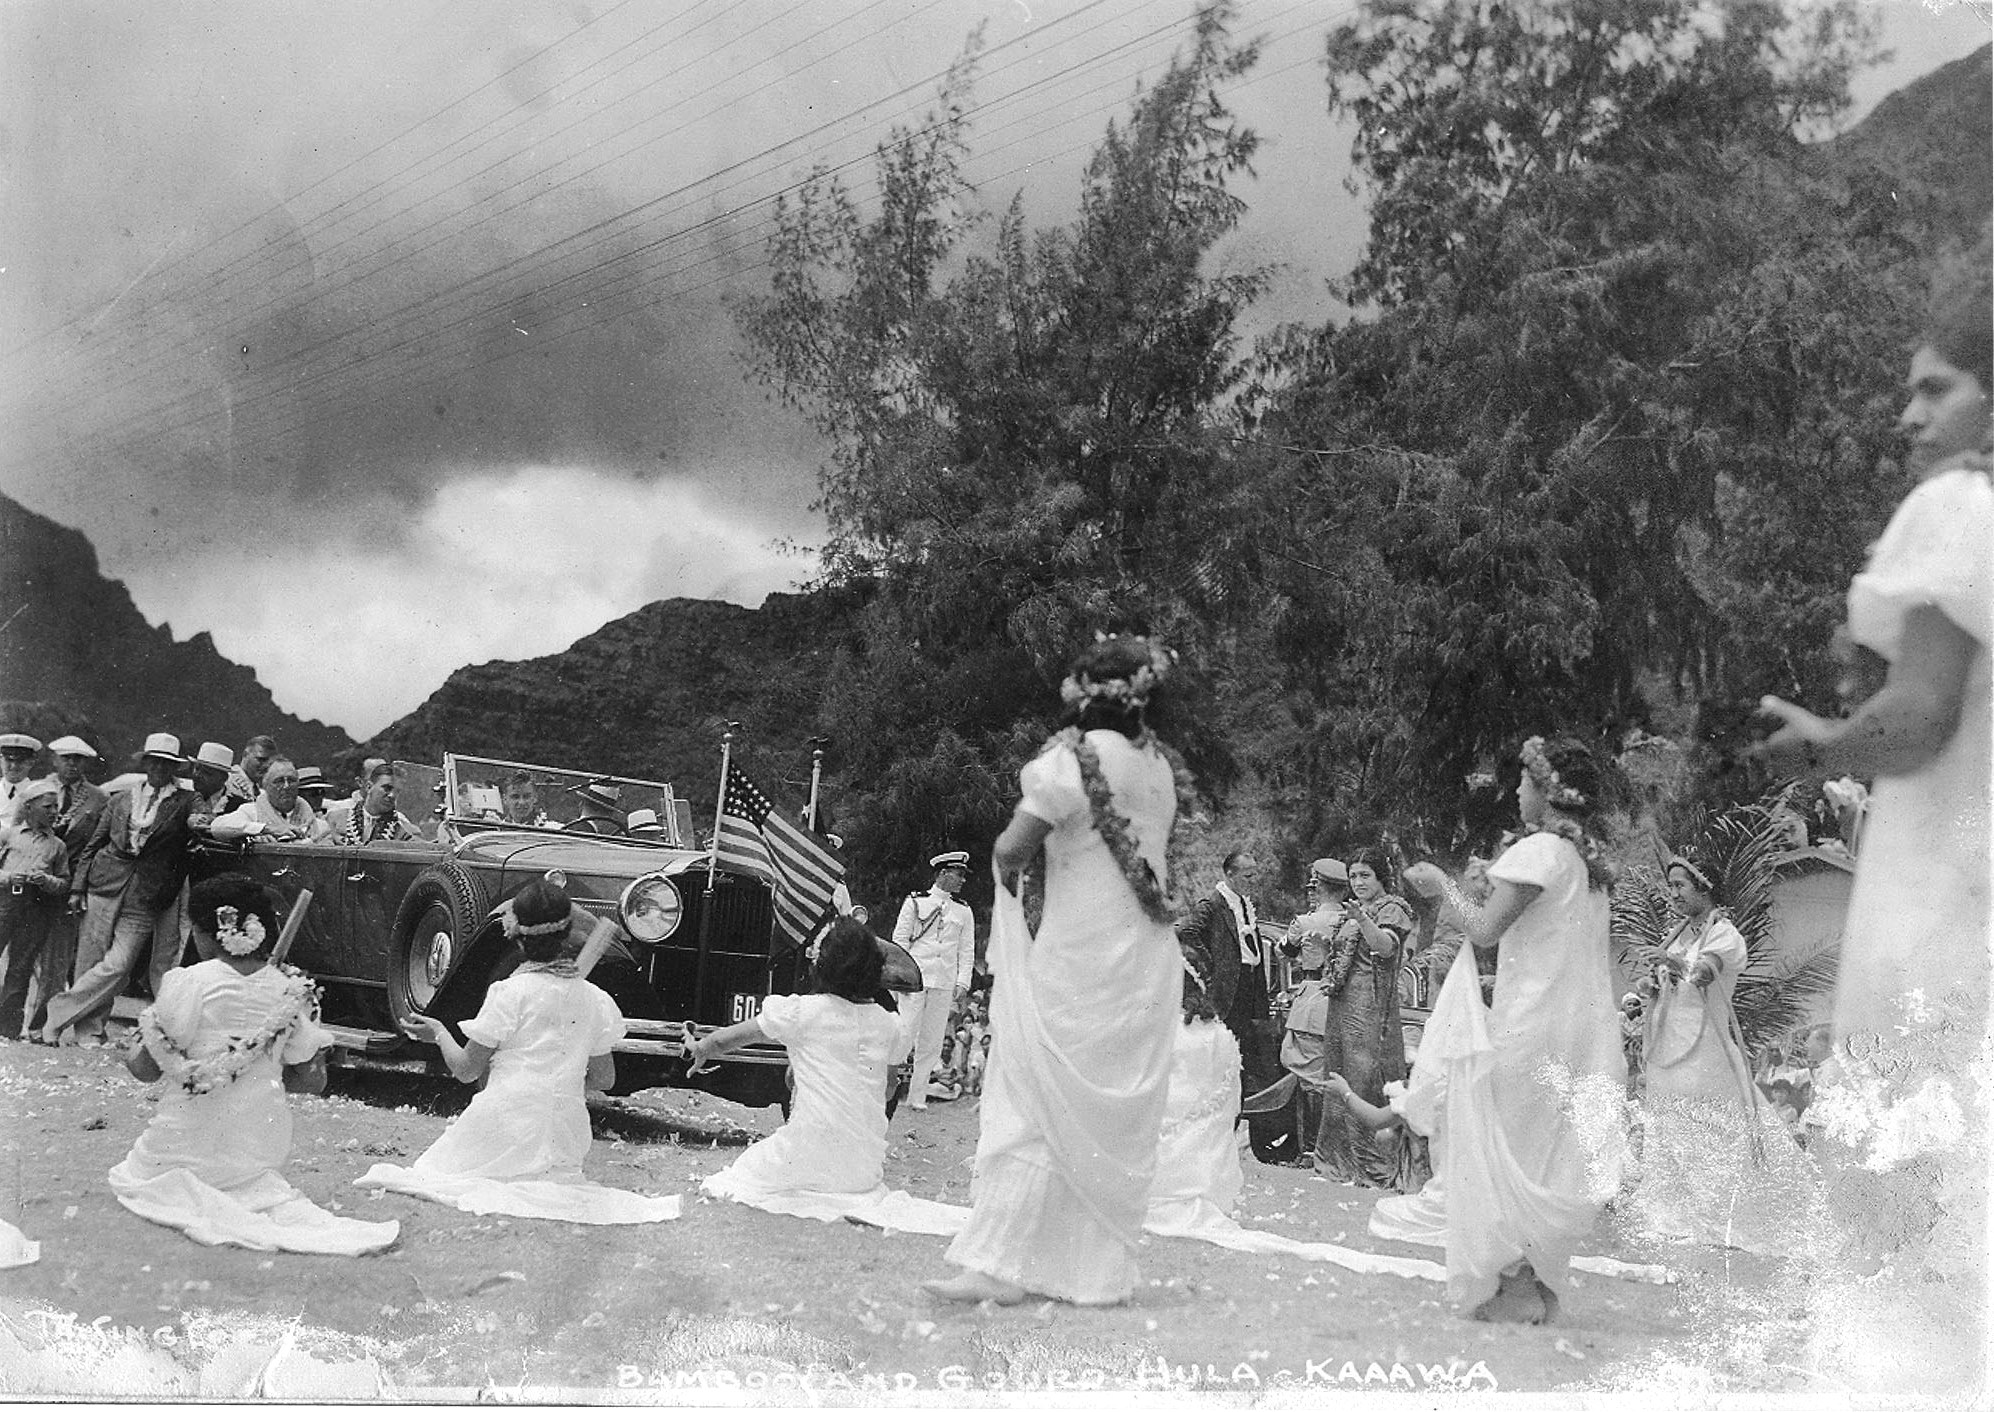 Students at the Ka'a'awa School perform the Bamboo and Gourd Hula as a welcome for President Franklin Roosevelt (seated in car) who was touring the island, Ka'a'awa, Oahu, Hawaii, 26 Jul 1934.